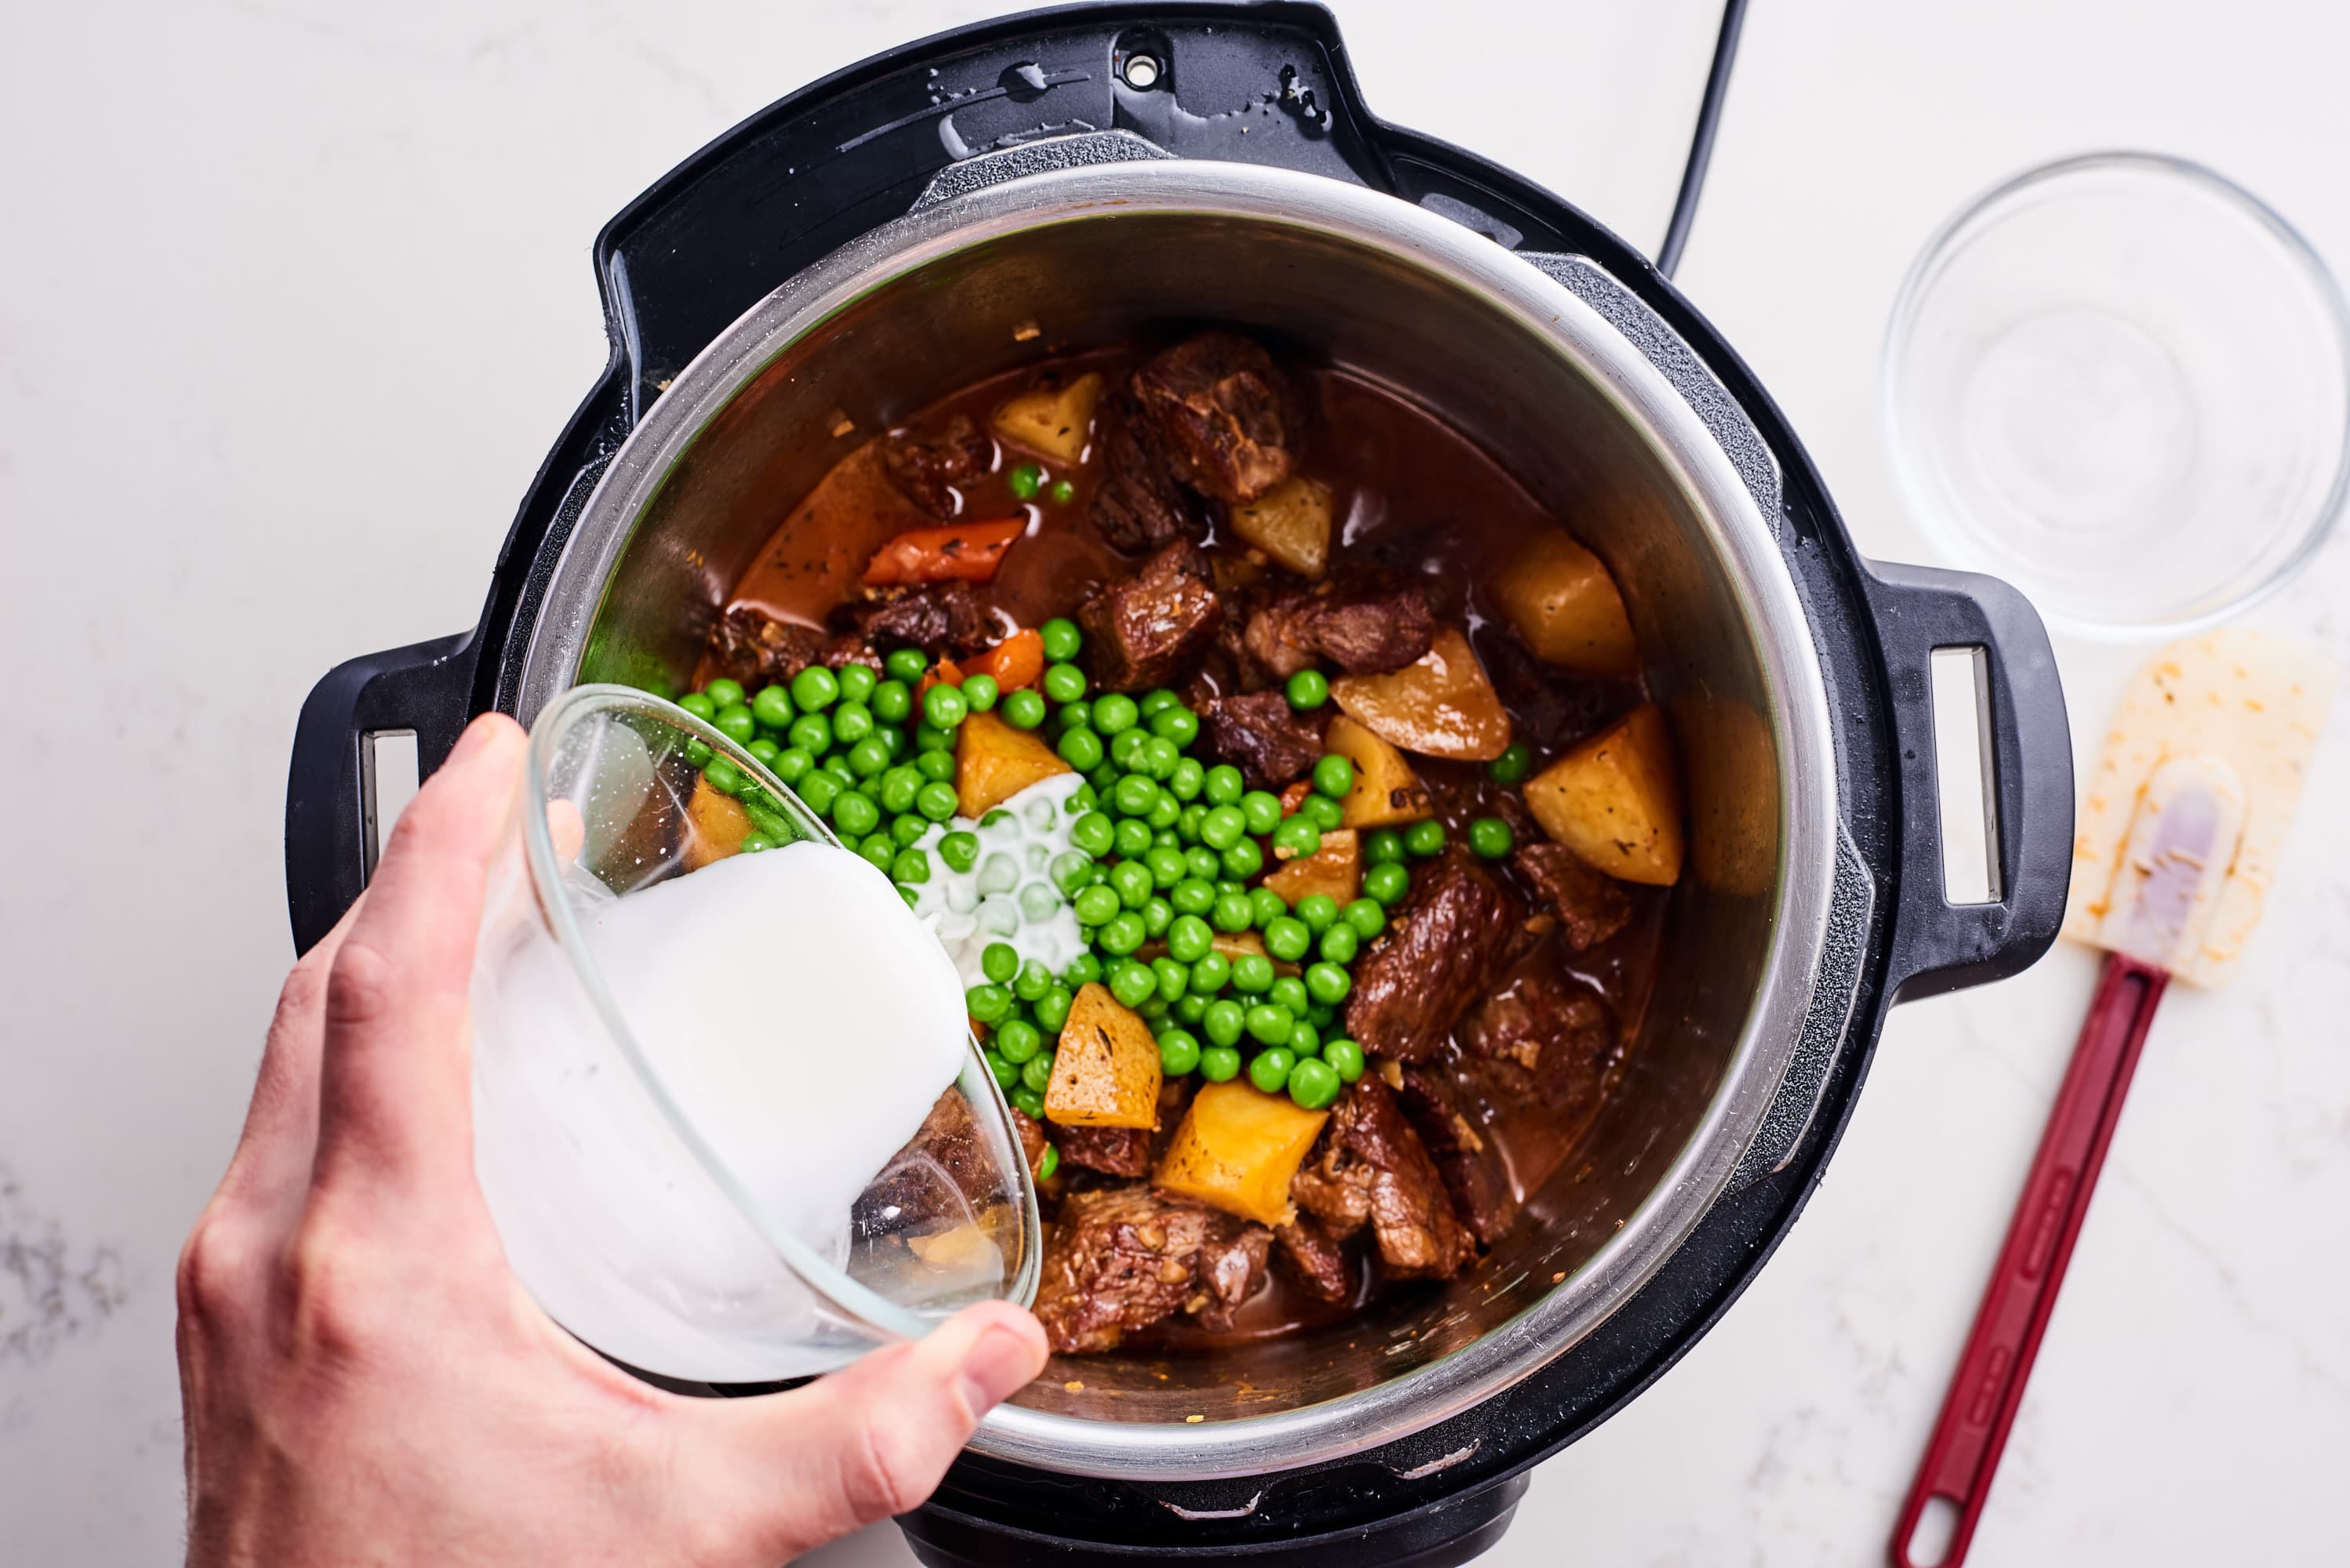 https://cdn.apartmenttherapy.info/image/upload/v1572033358/k/Photo/Recipes/2019-10-how-to-instant-pot-beef-stew/2019-10-21_Kitchn88911_HT-Beef-Stew.jpg